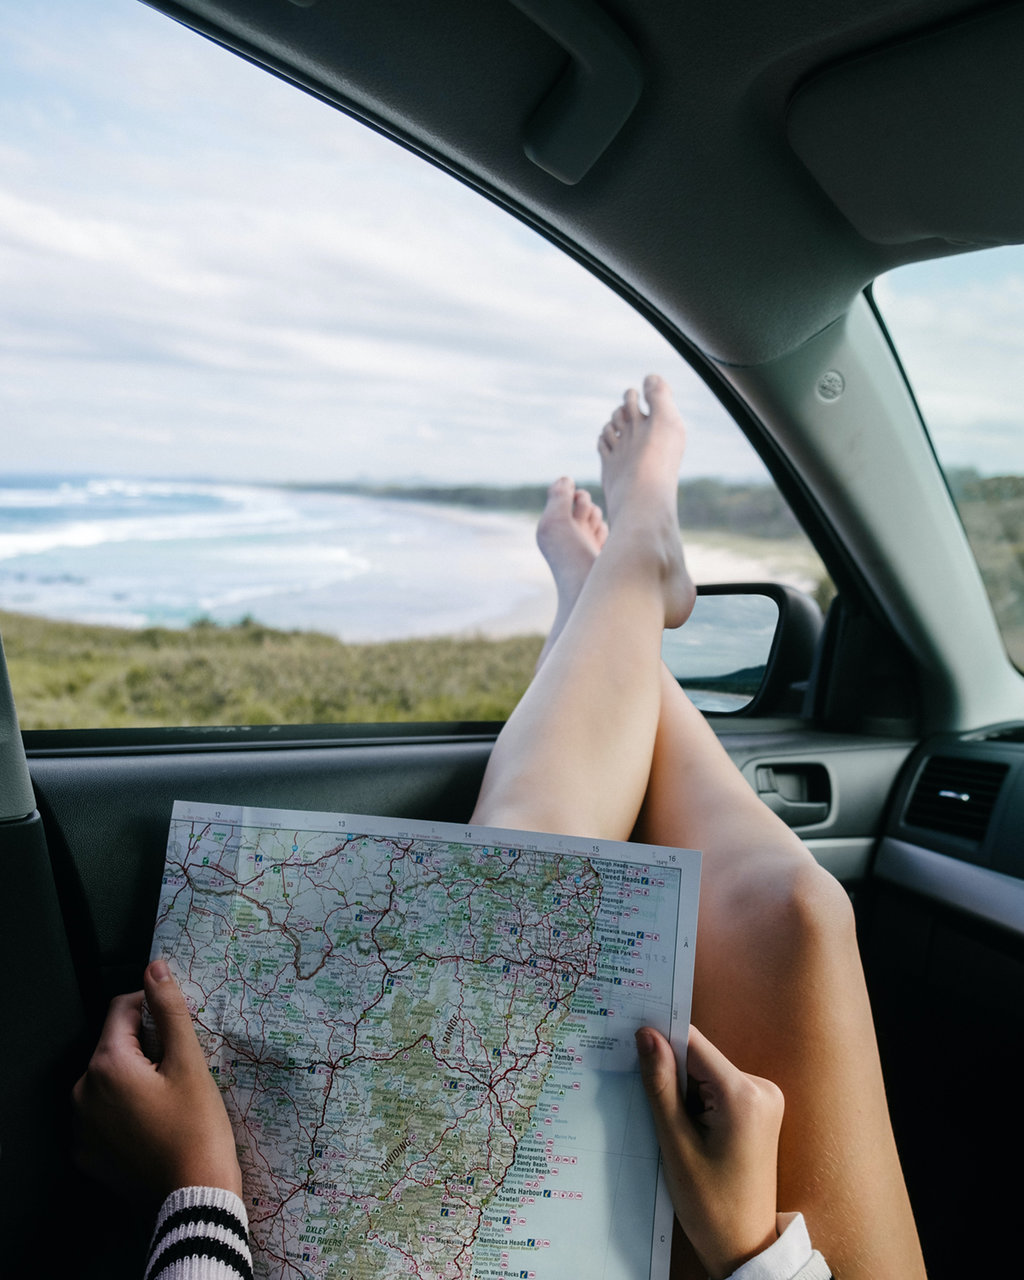 Pack These Road Trip Essentials For An Epic Family Vacation